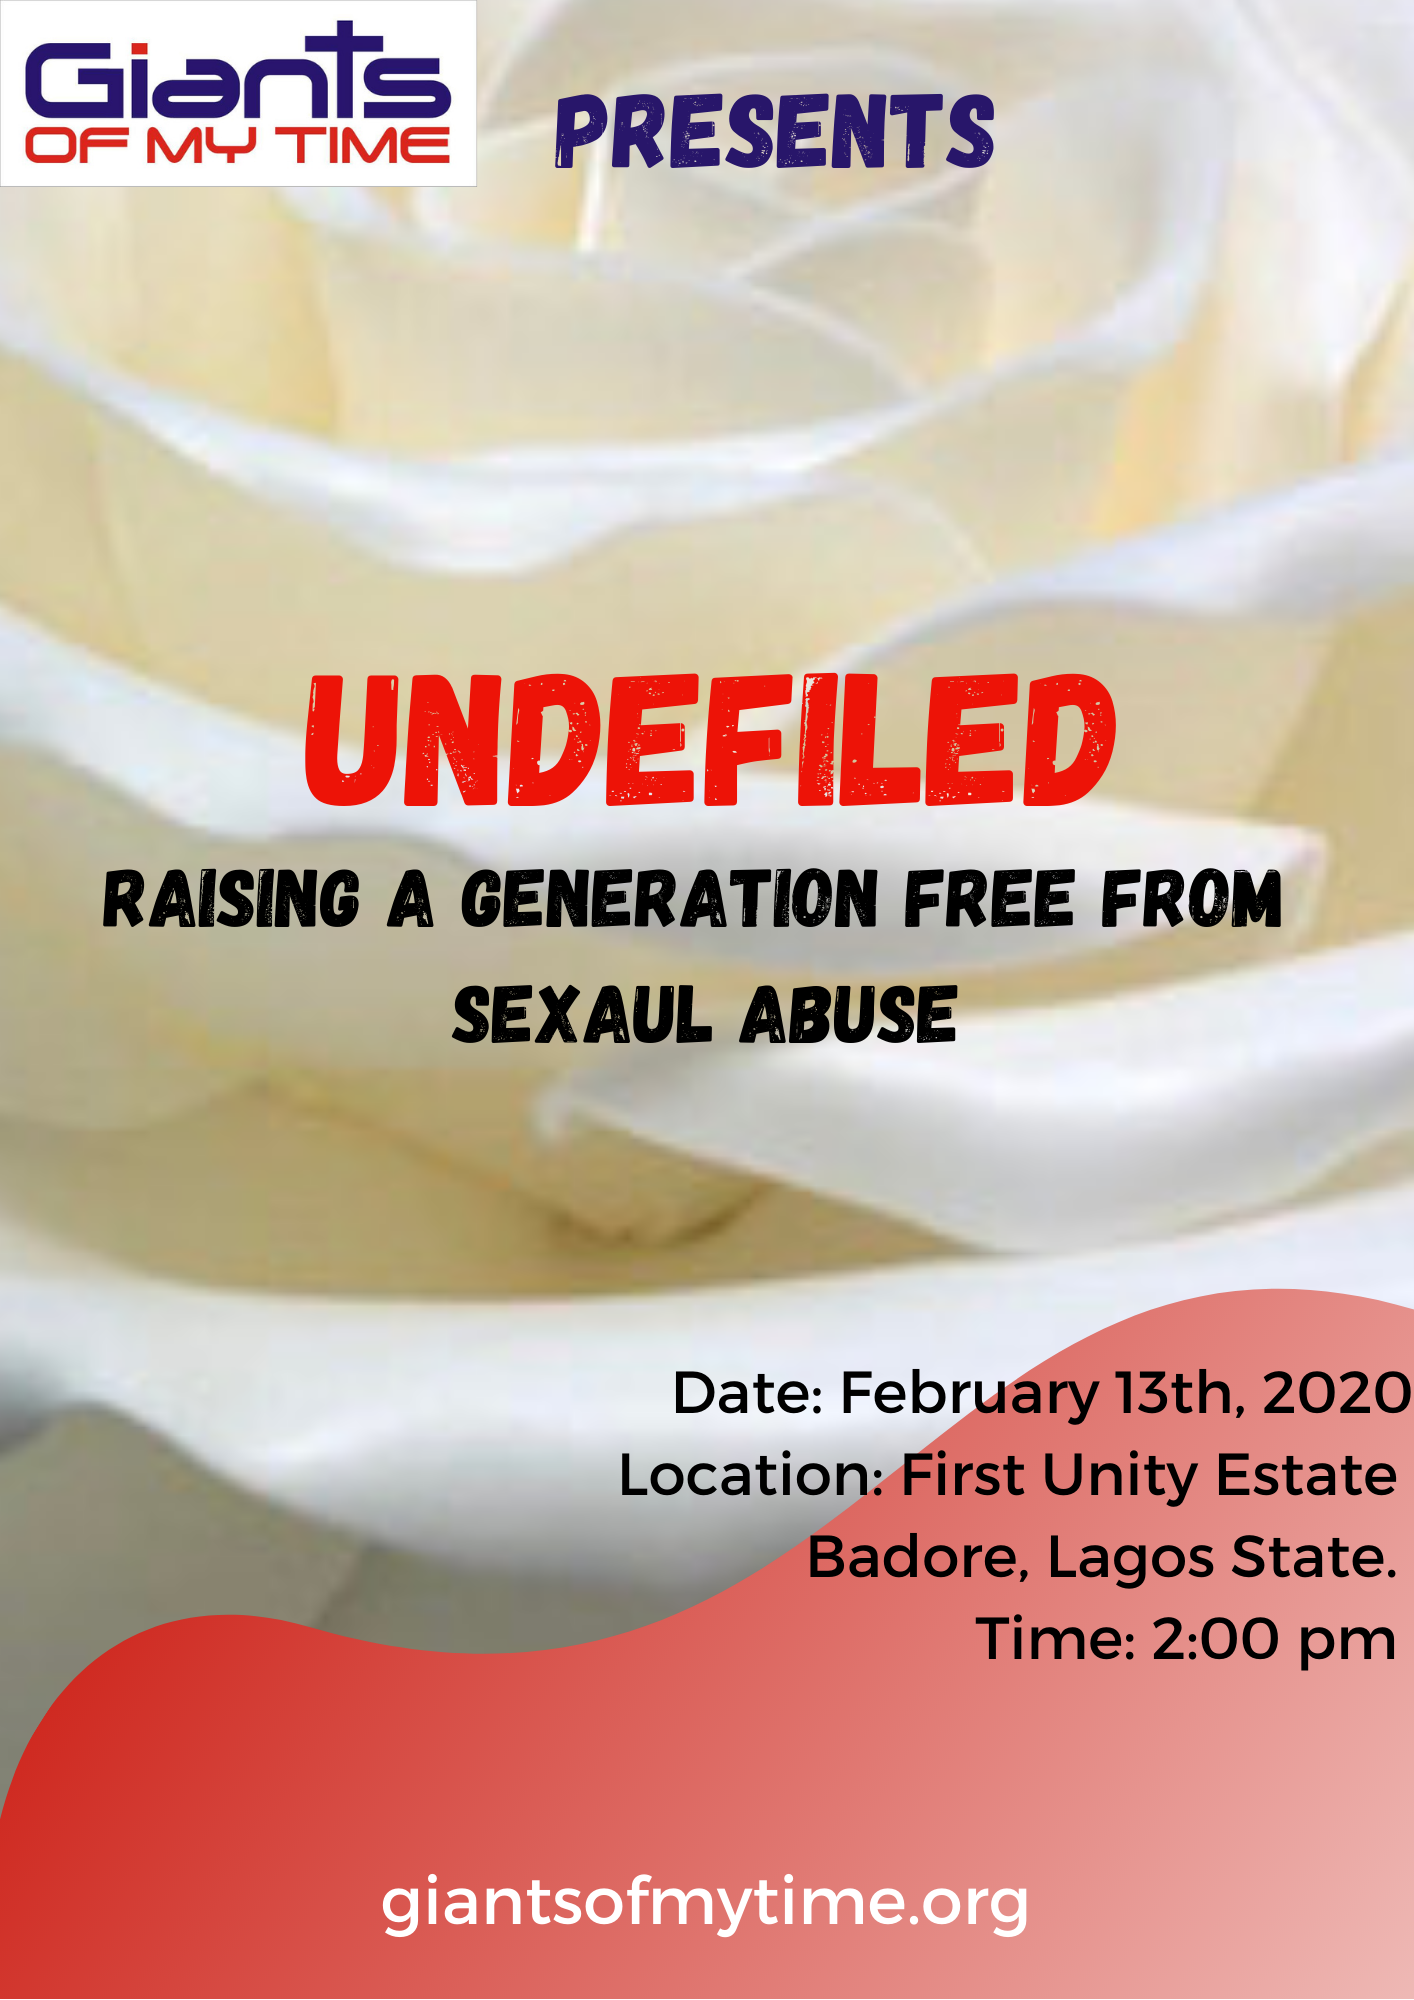 UNDEFILED, raising a generation free from sexual abuse